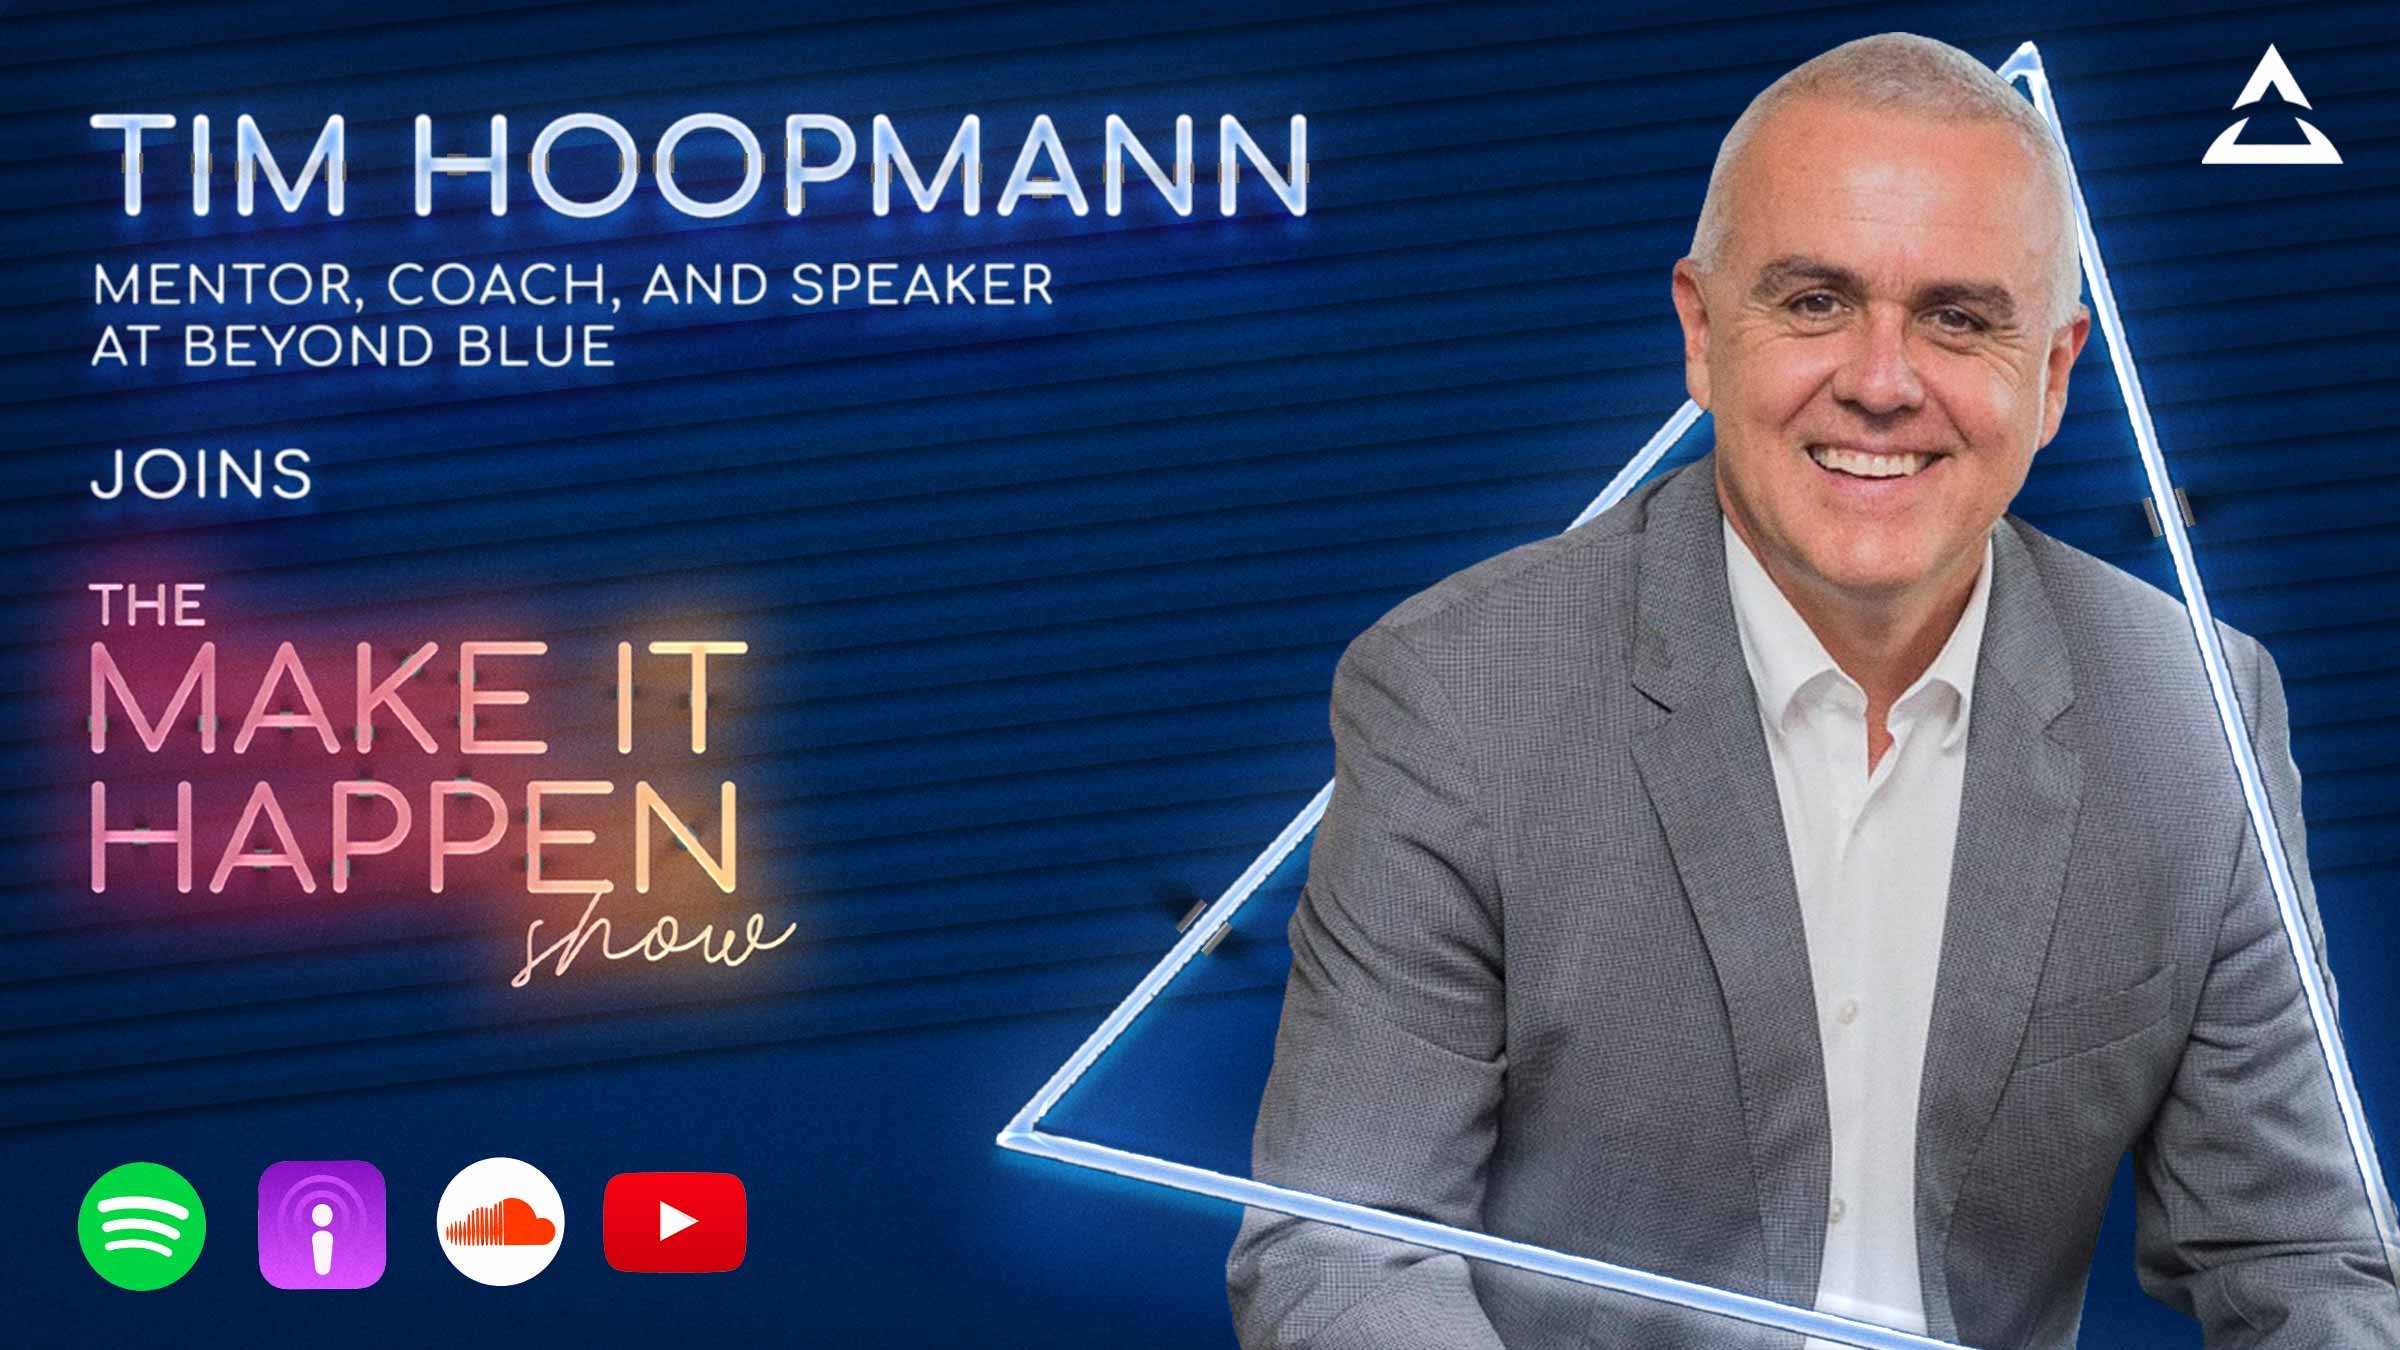 Tim Hoopmann, Mentor, Coach and Speaker at Beyond Blue joins The Make It Happen Show